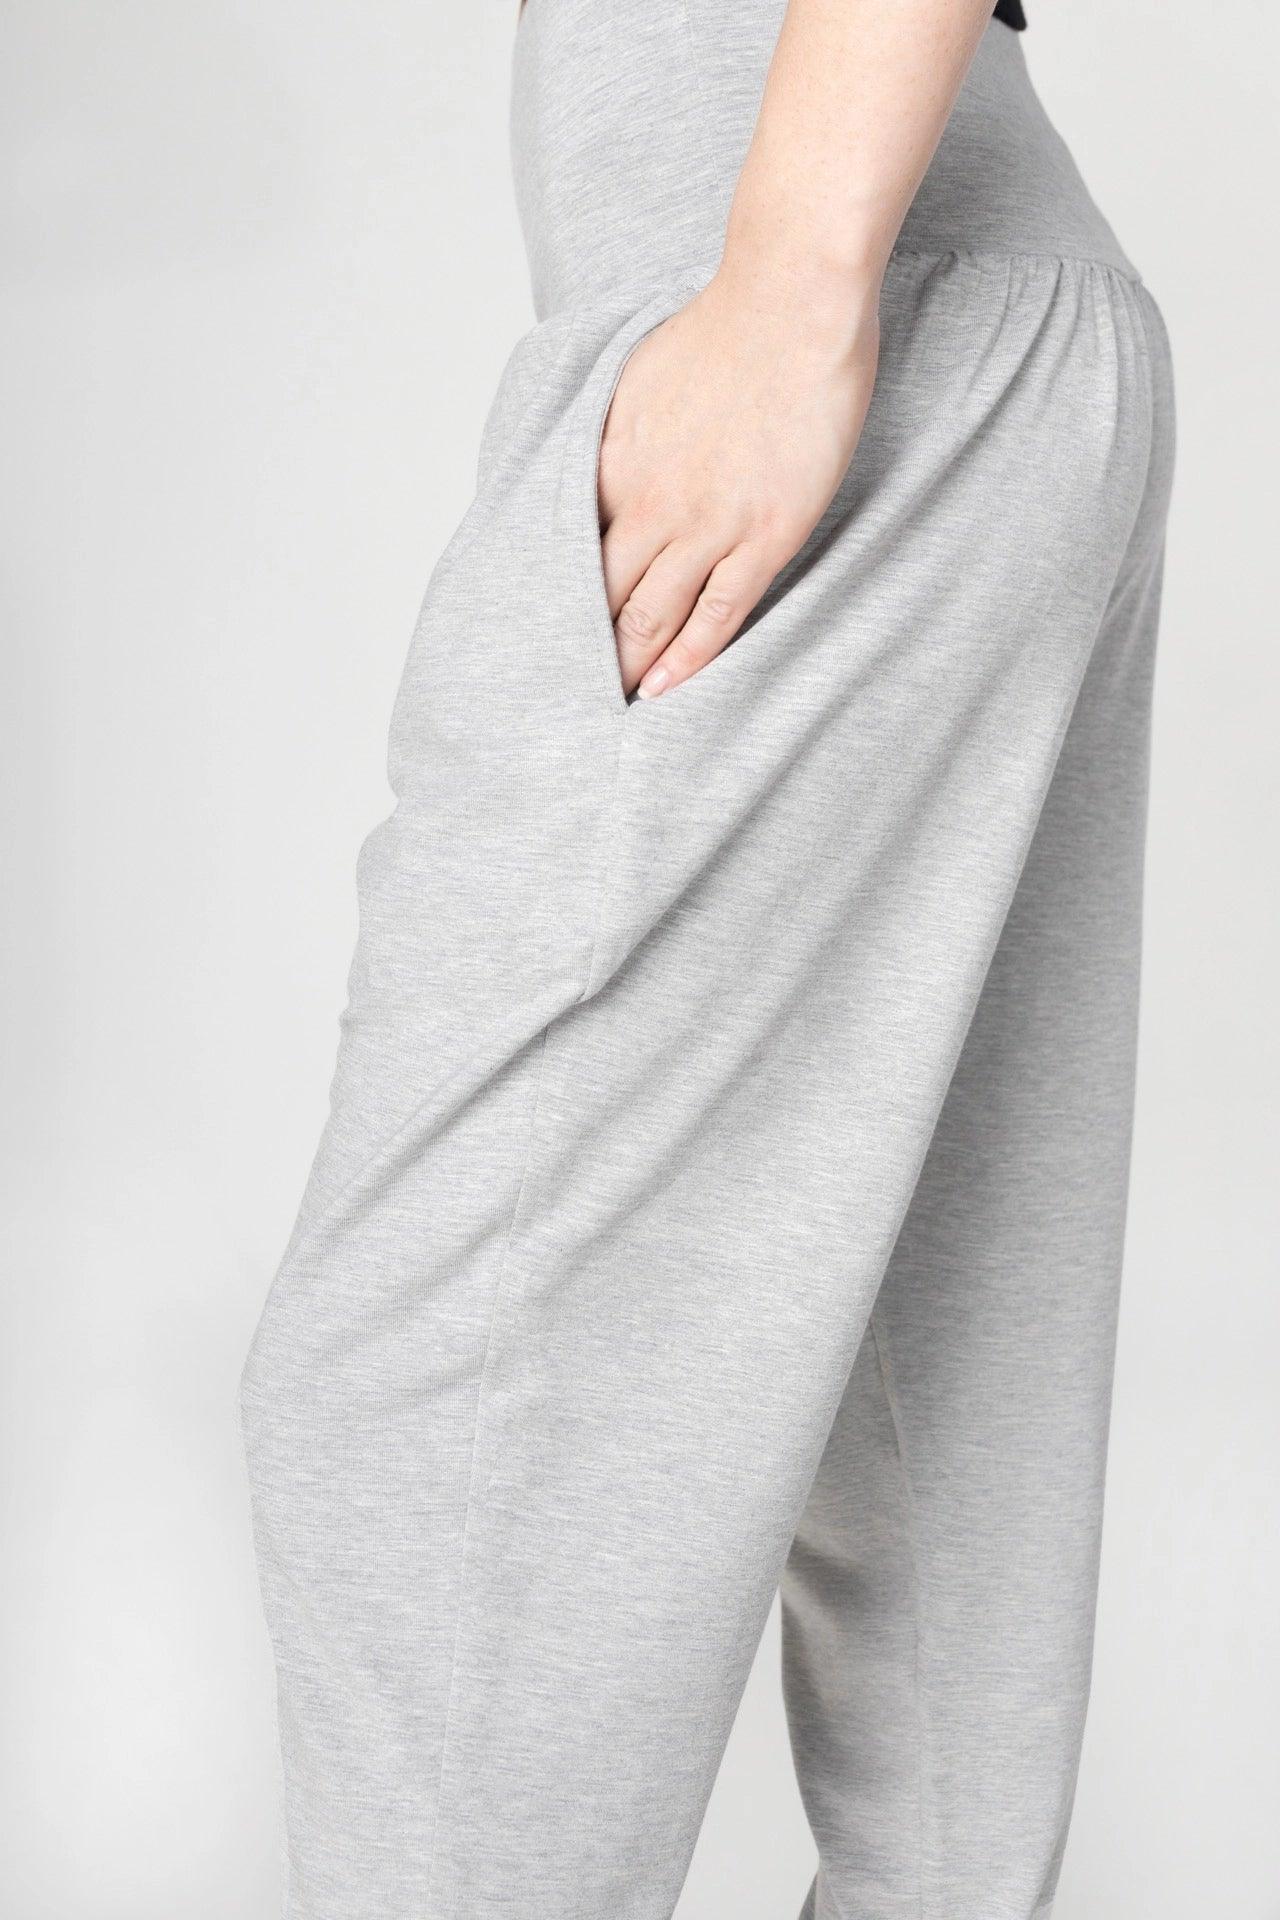 Women's Super-Soft High Rise Joggers - NOT LABELED